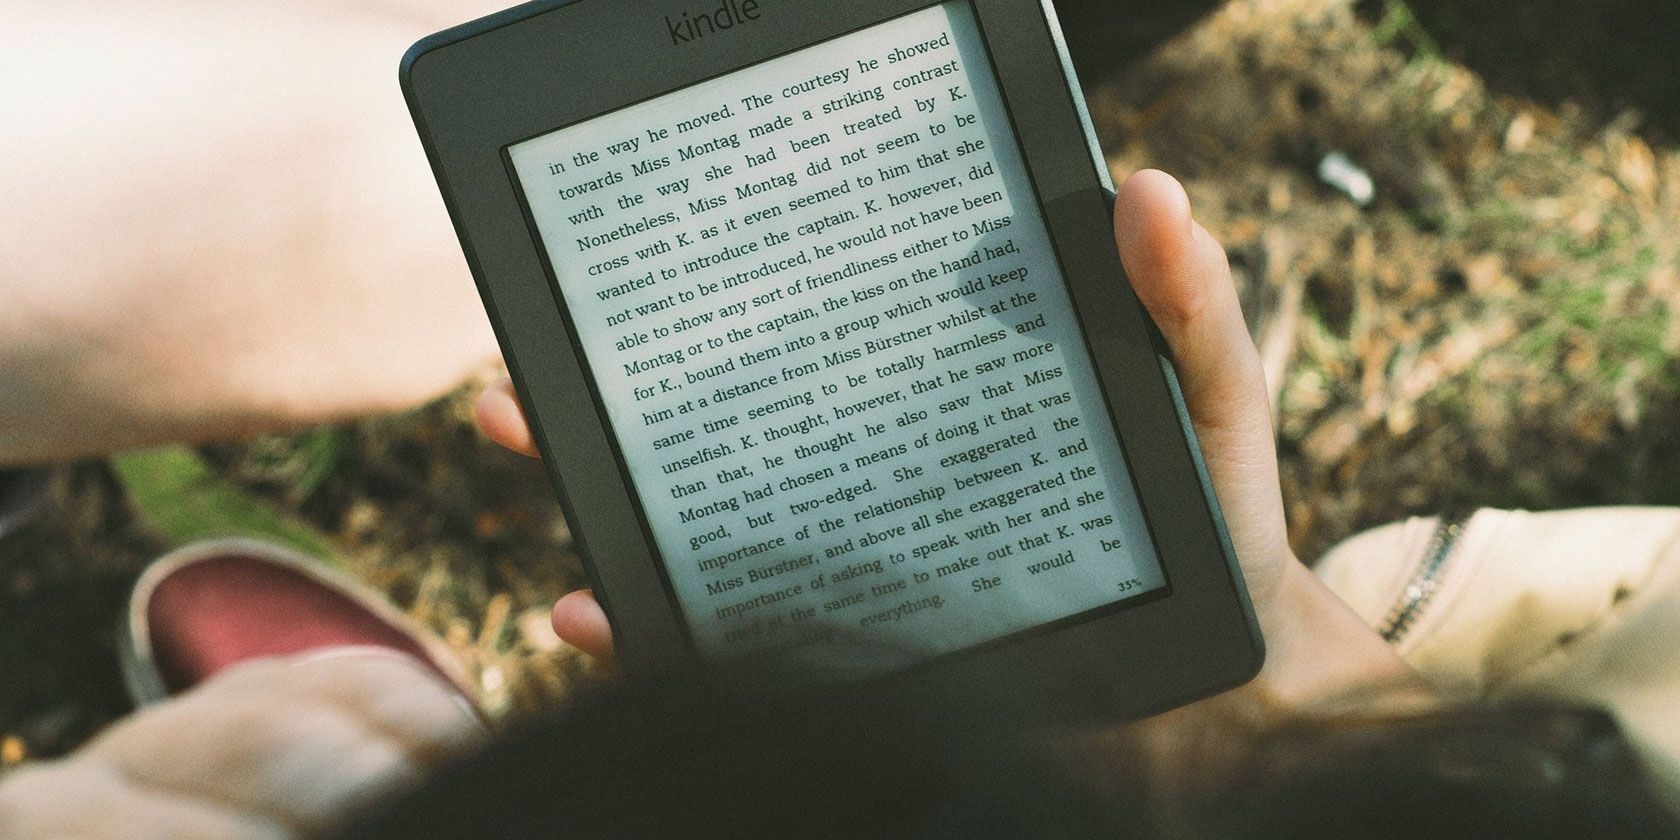 new kindle reader release date